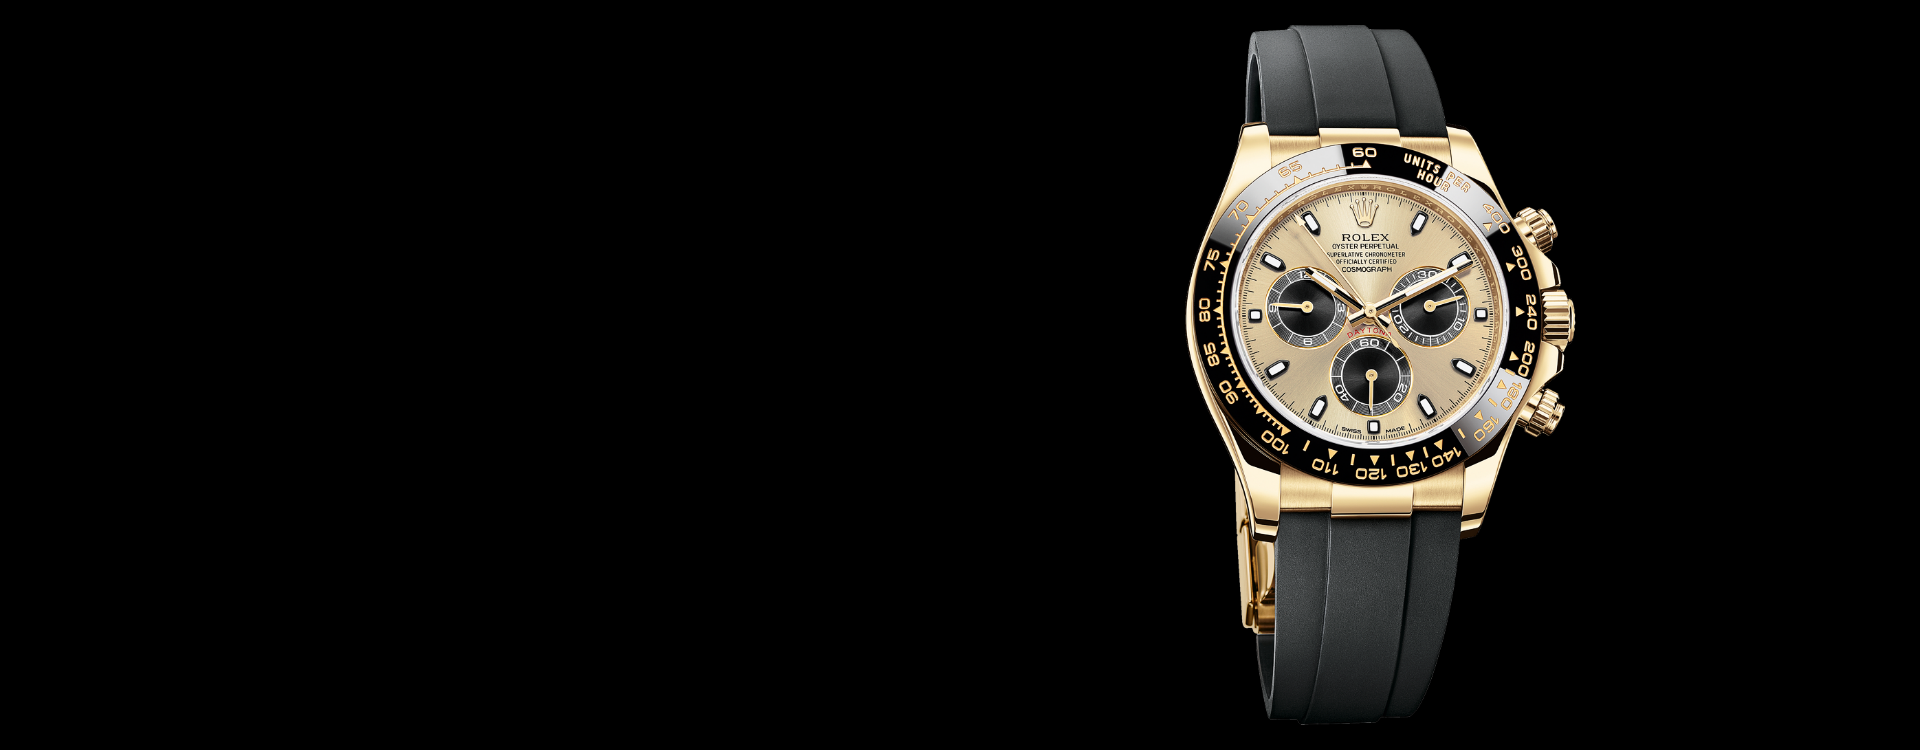 Jewelry by Giorgio, a banner image of a rolex watch